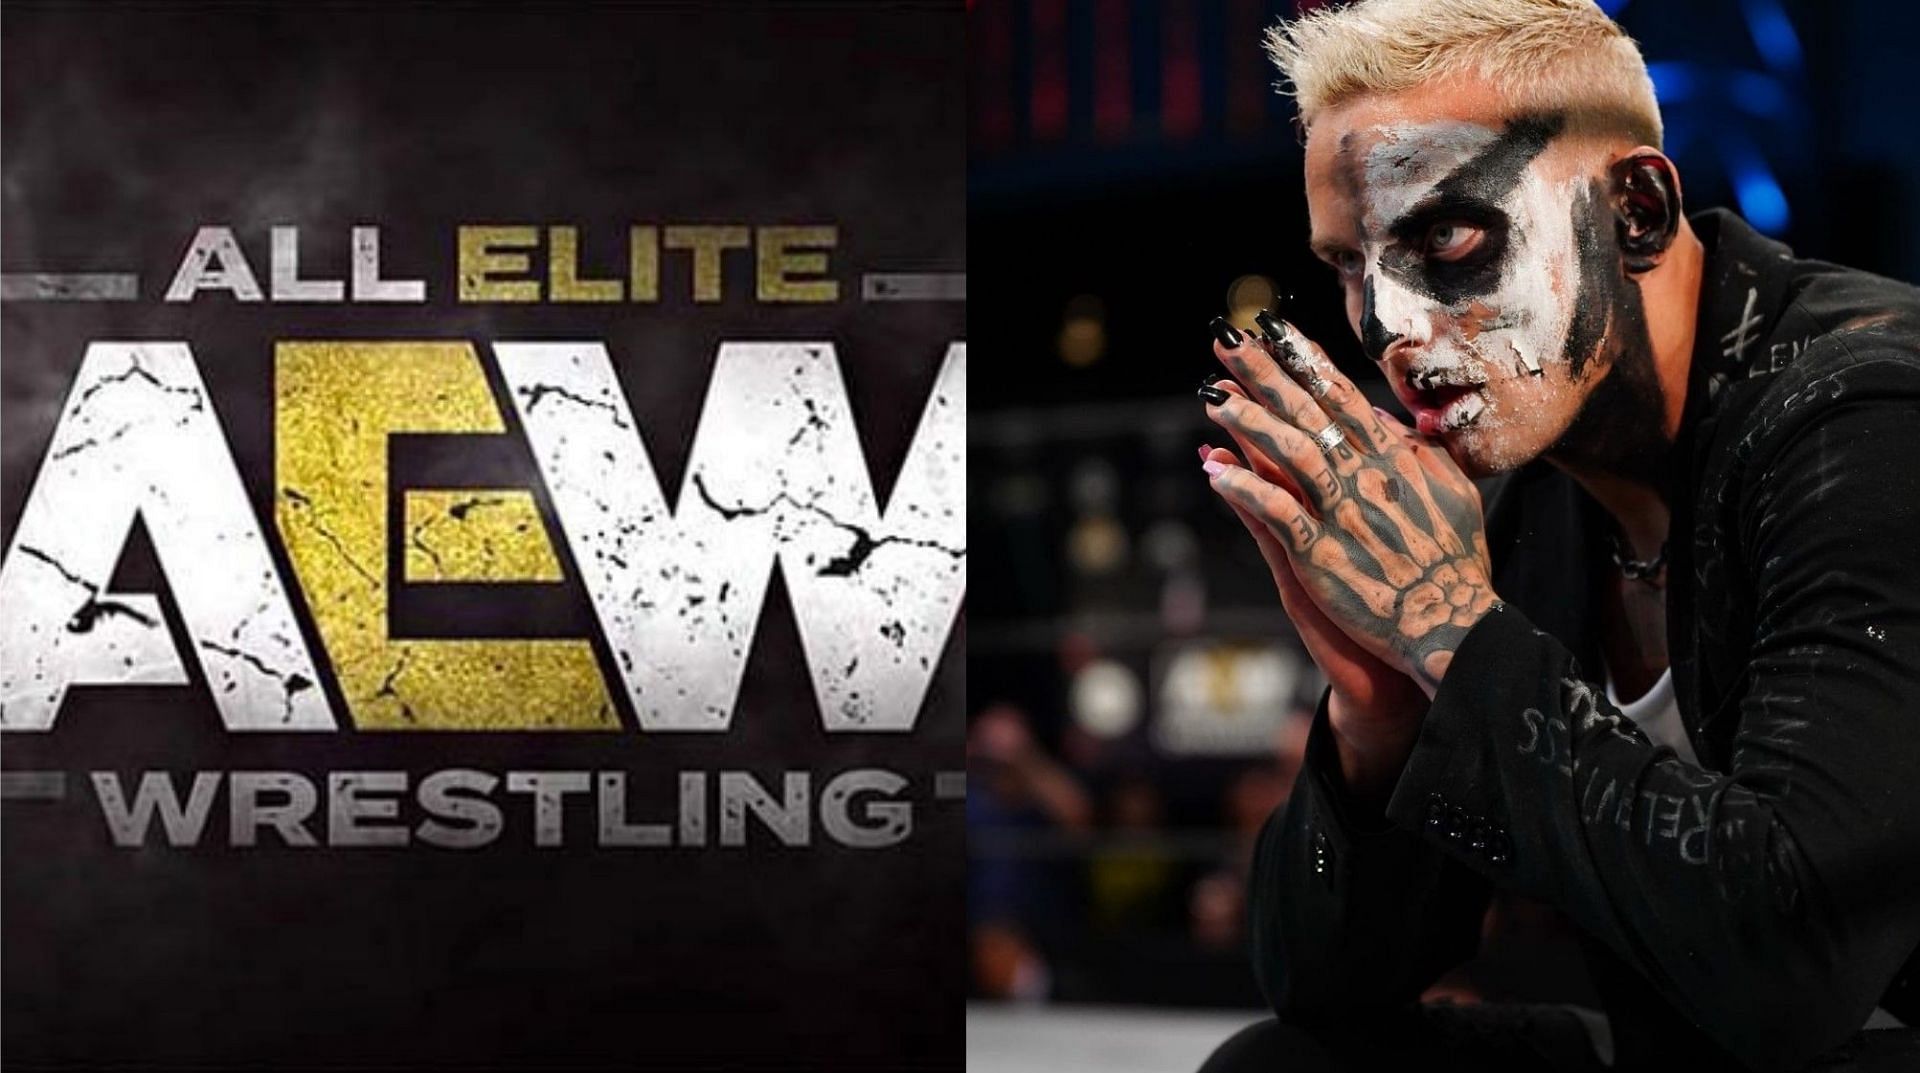 Darby Allin is eyeing big matches in AEW